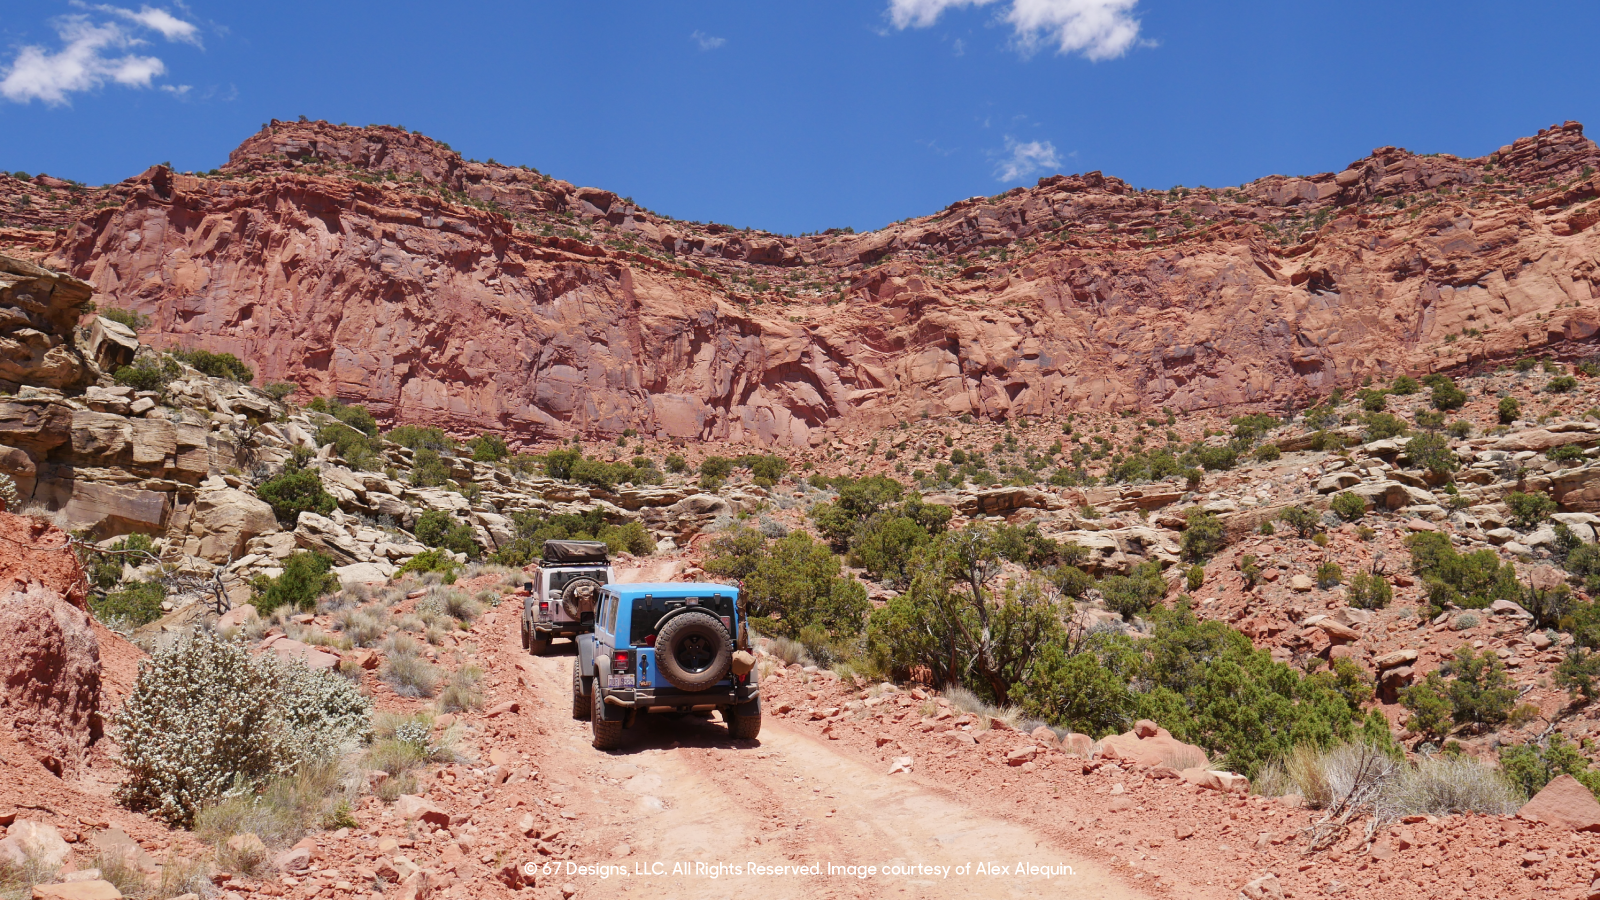 Jeep heading off into the red rocks